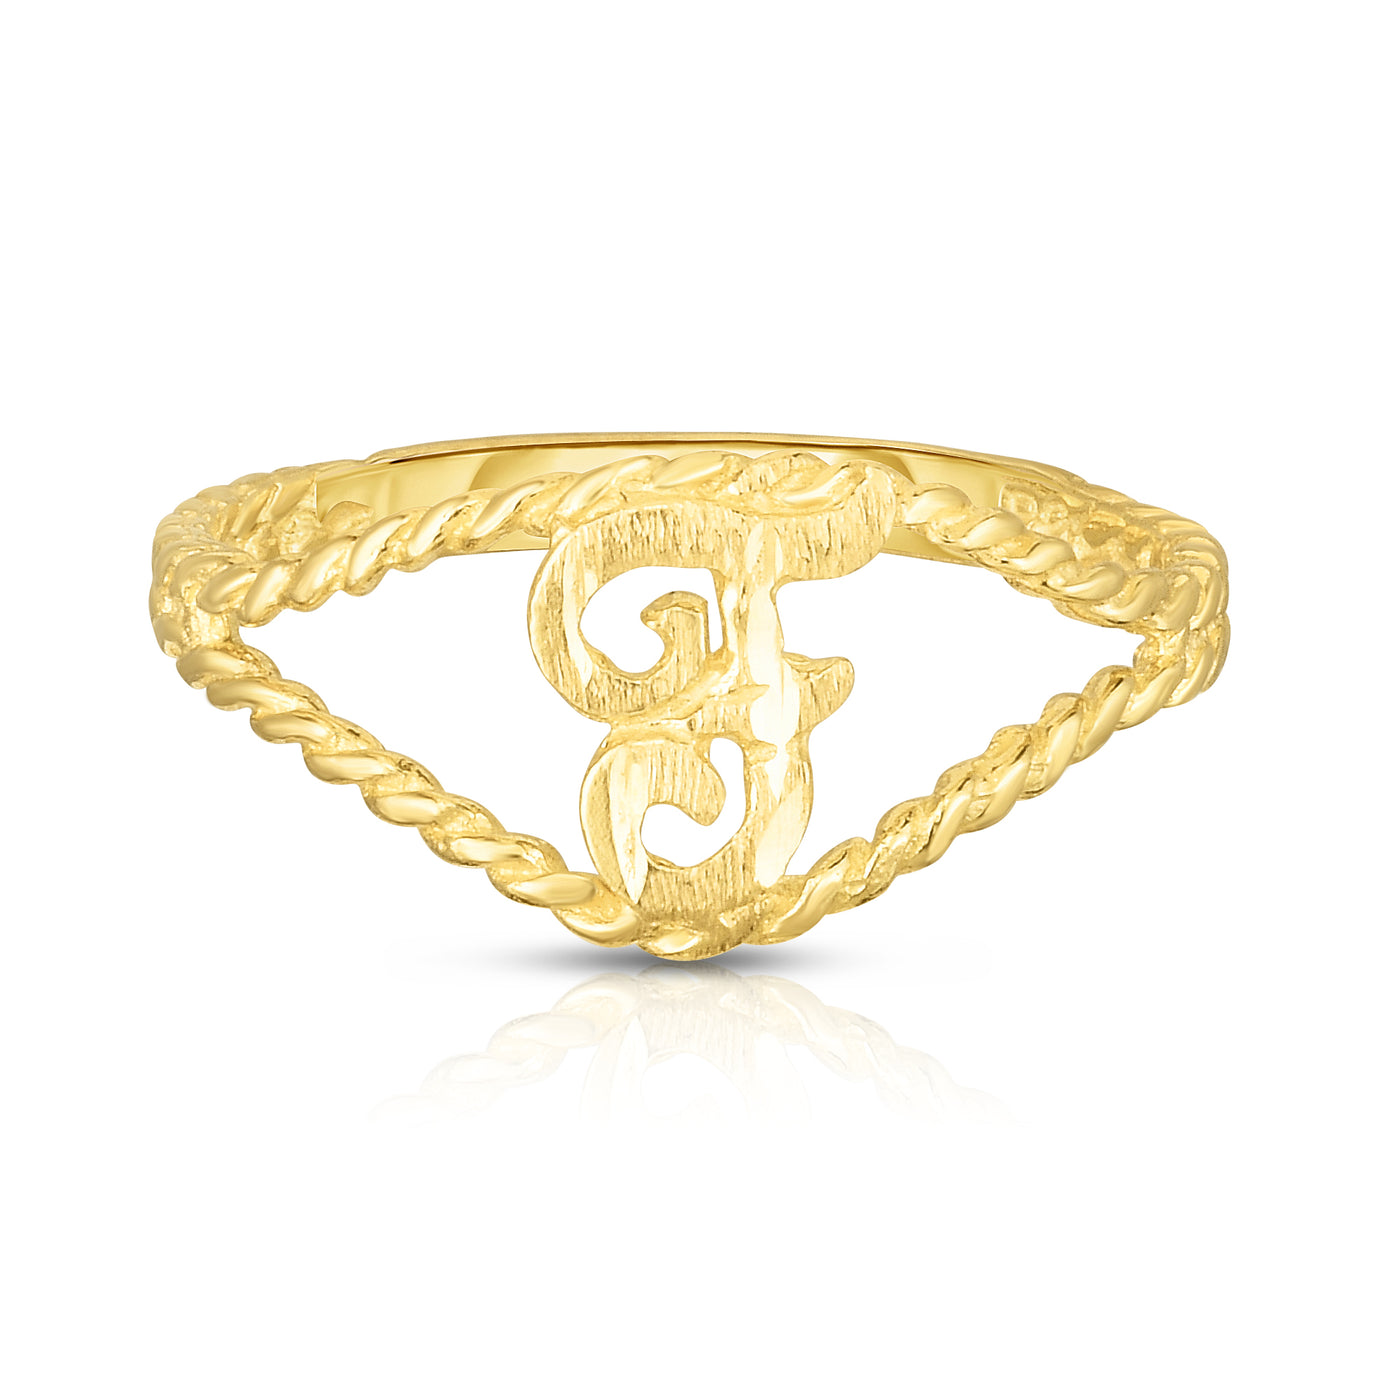 ANALISE - The Split Shank Initial Ring